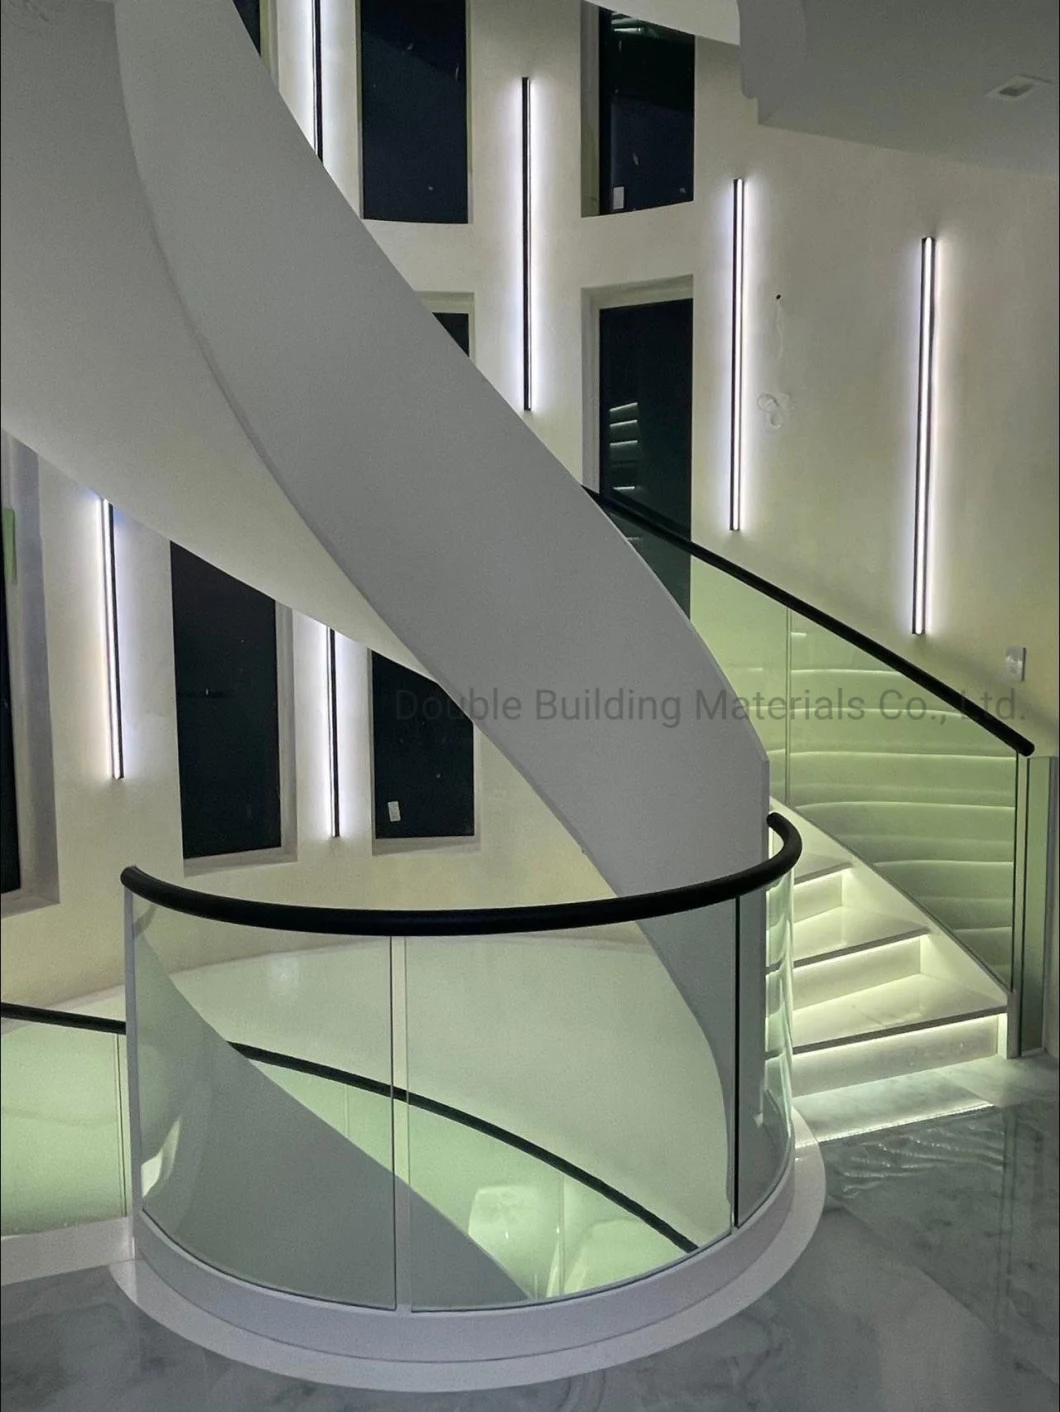 Modern Steel Spiral Staircase Design Wood Marble Stairs Metal Curved Staircase